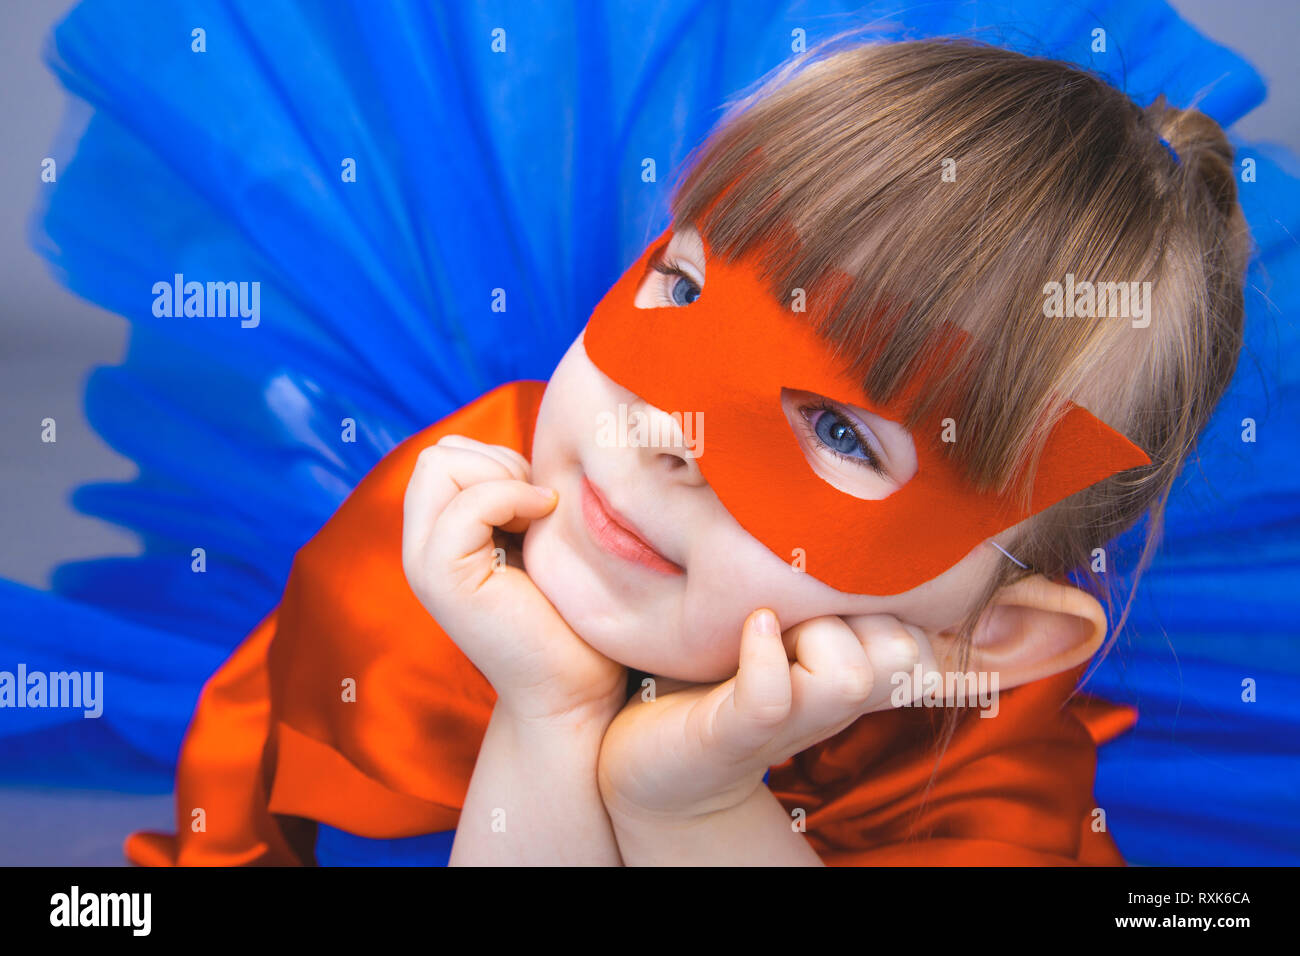 Little girl superhero in a red cloak and mask Stock Photo